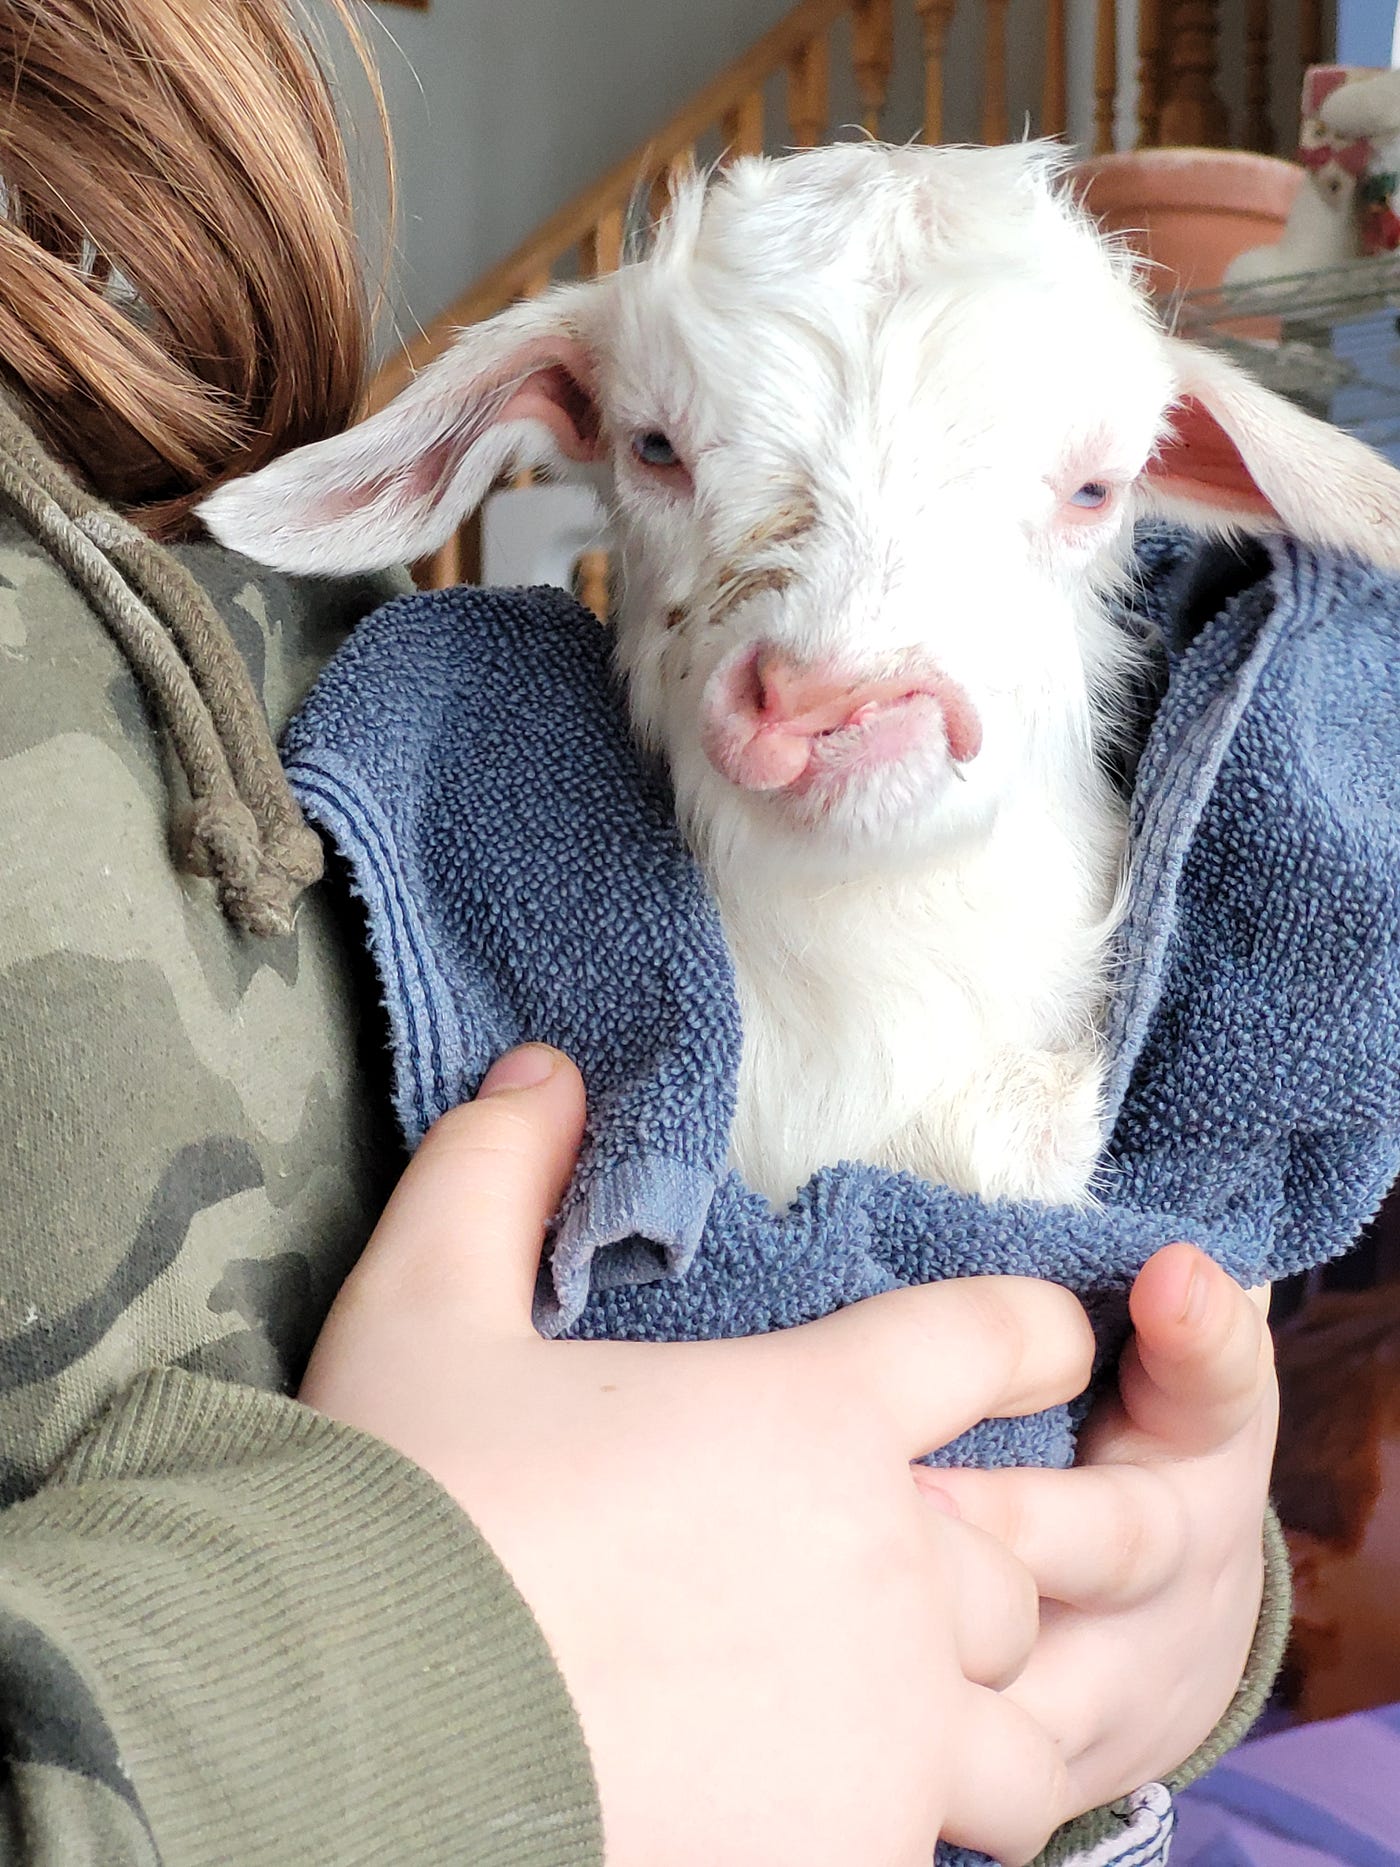 How Can You Tell If Your Goat Is Happy? Now We Know! : Goats and Soda : NPR